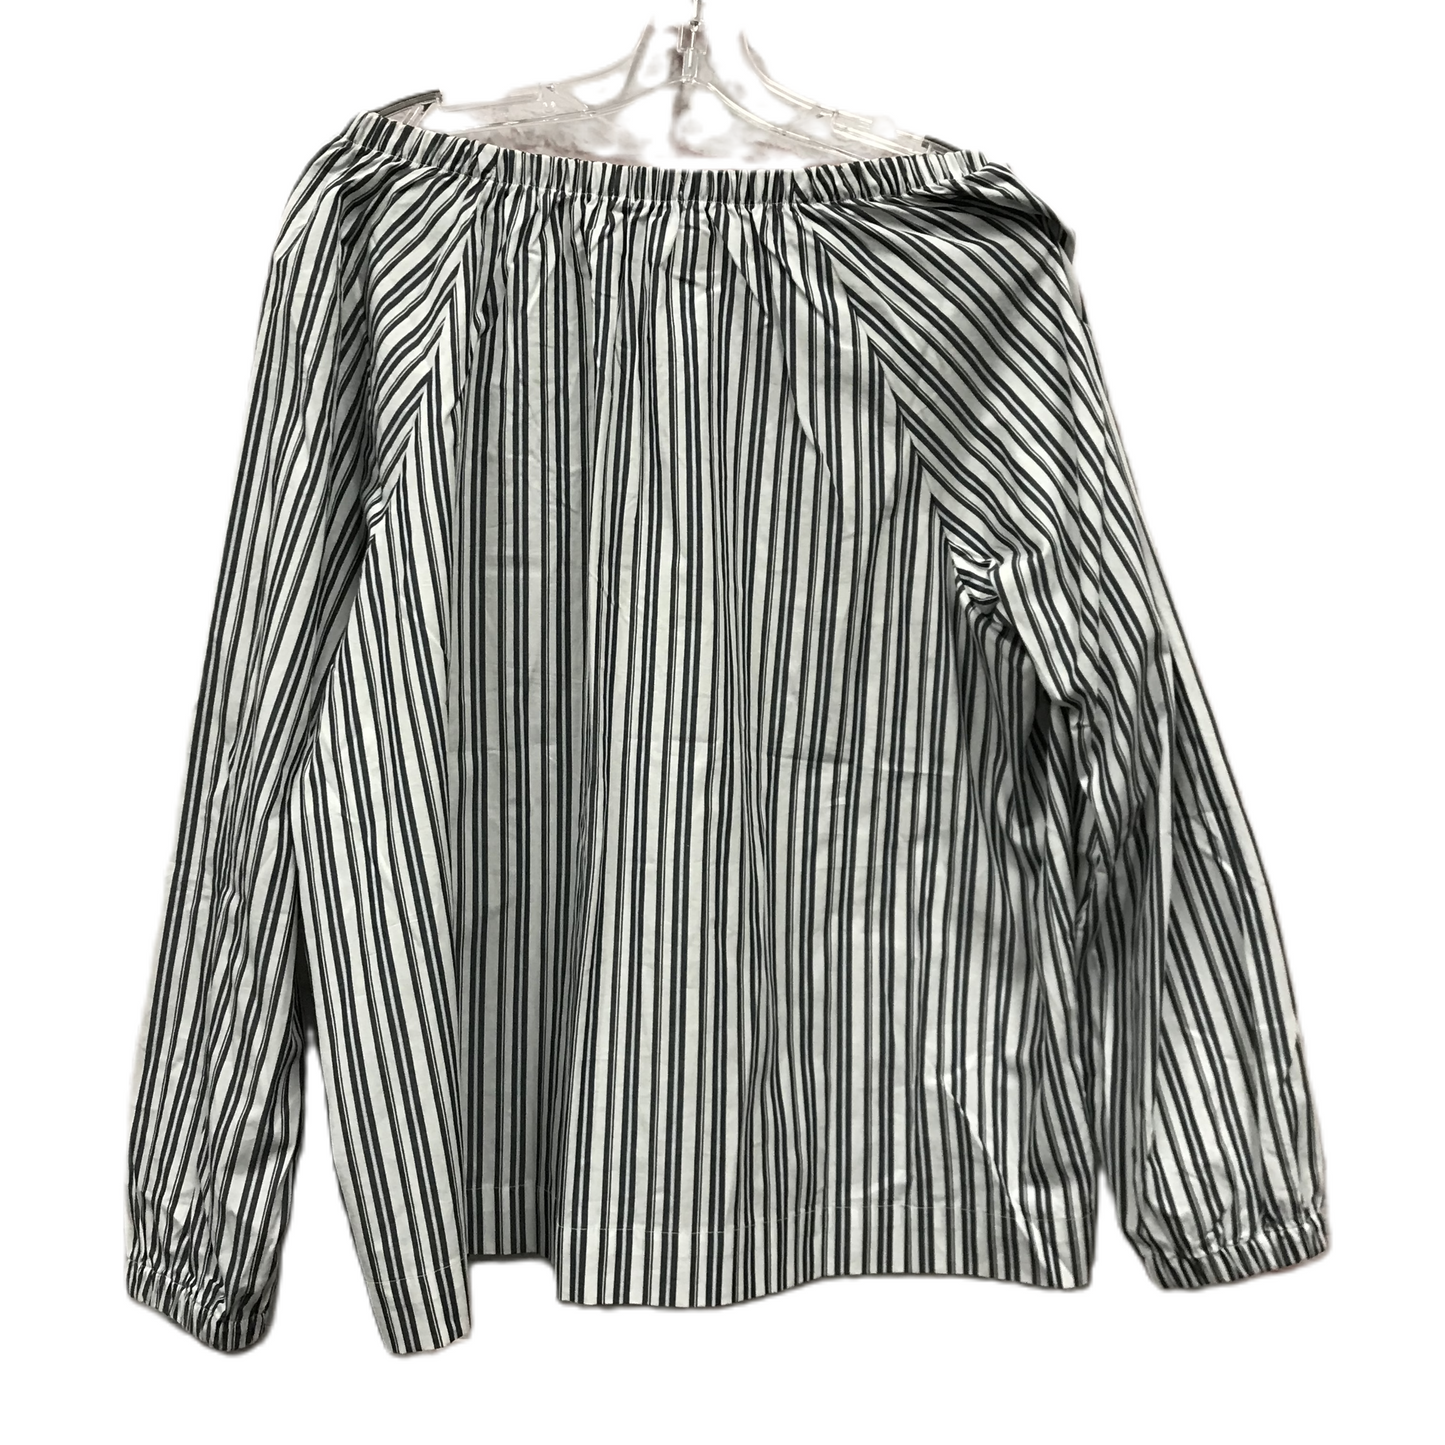 Grey & White Top Long Sleeve By Nine West, Size: Xl